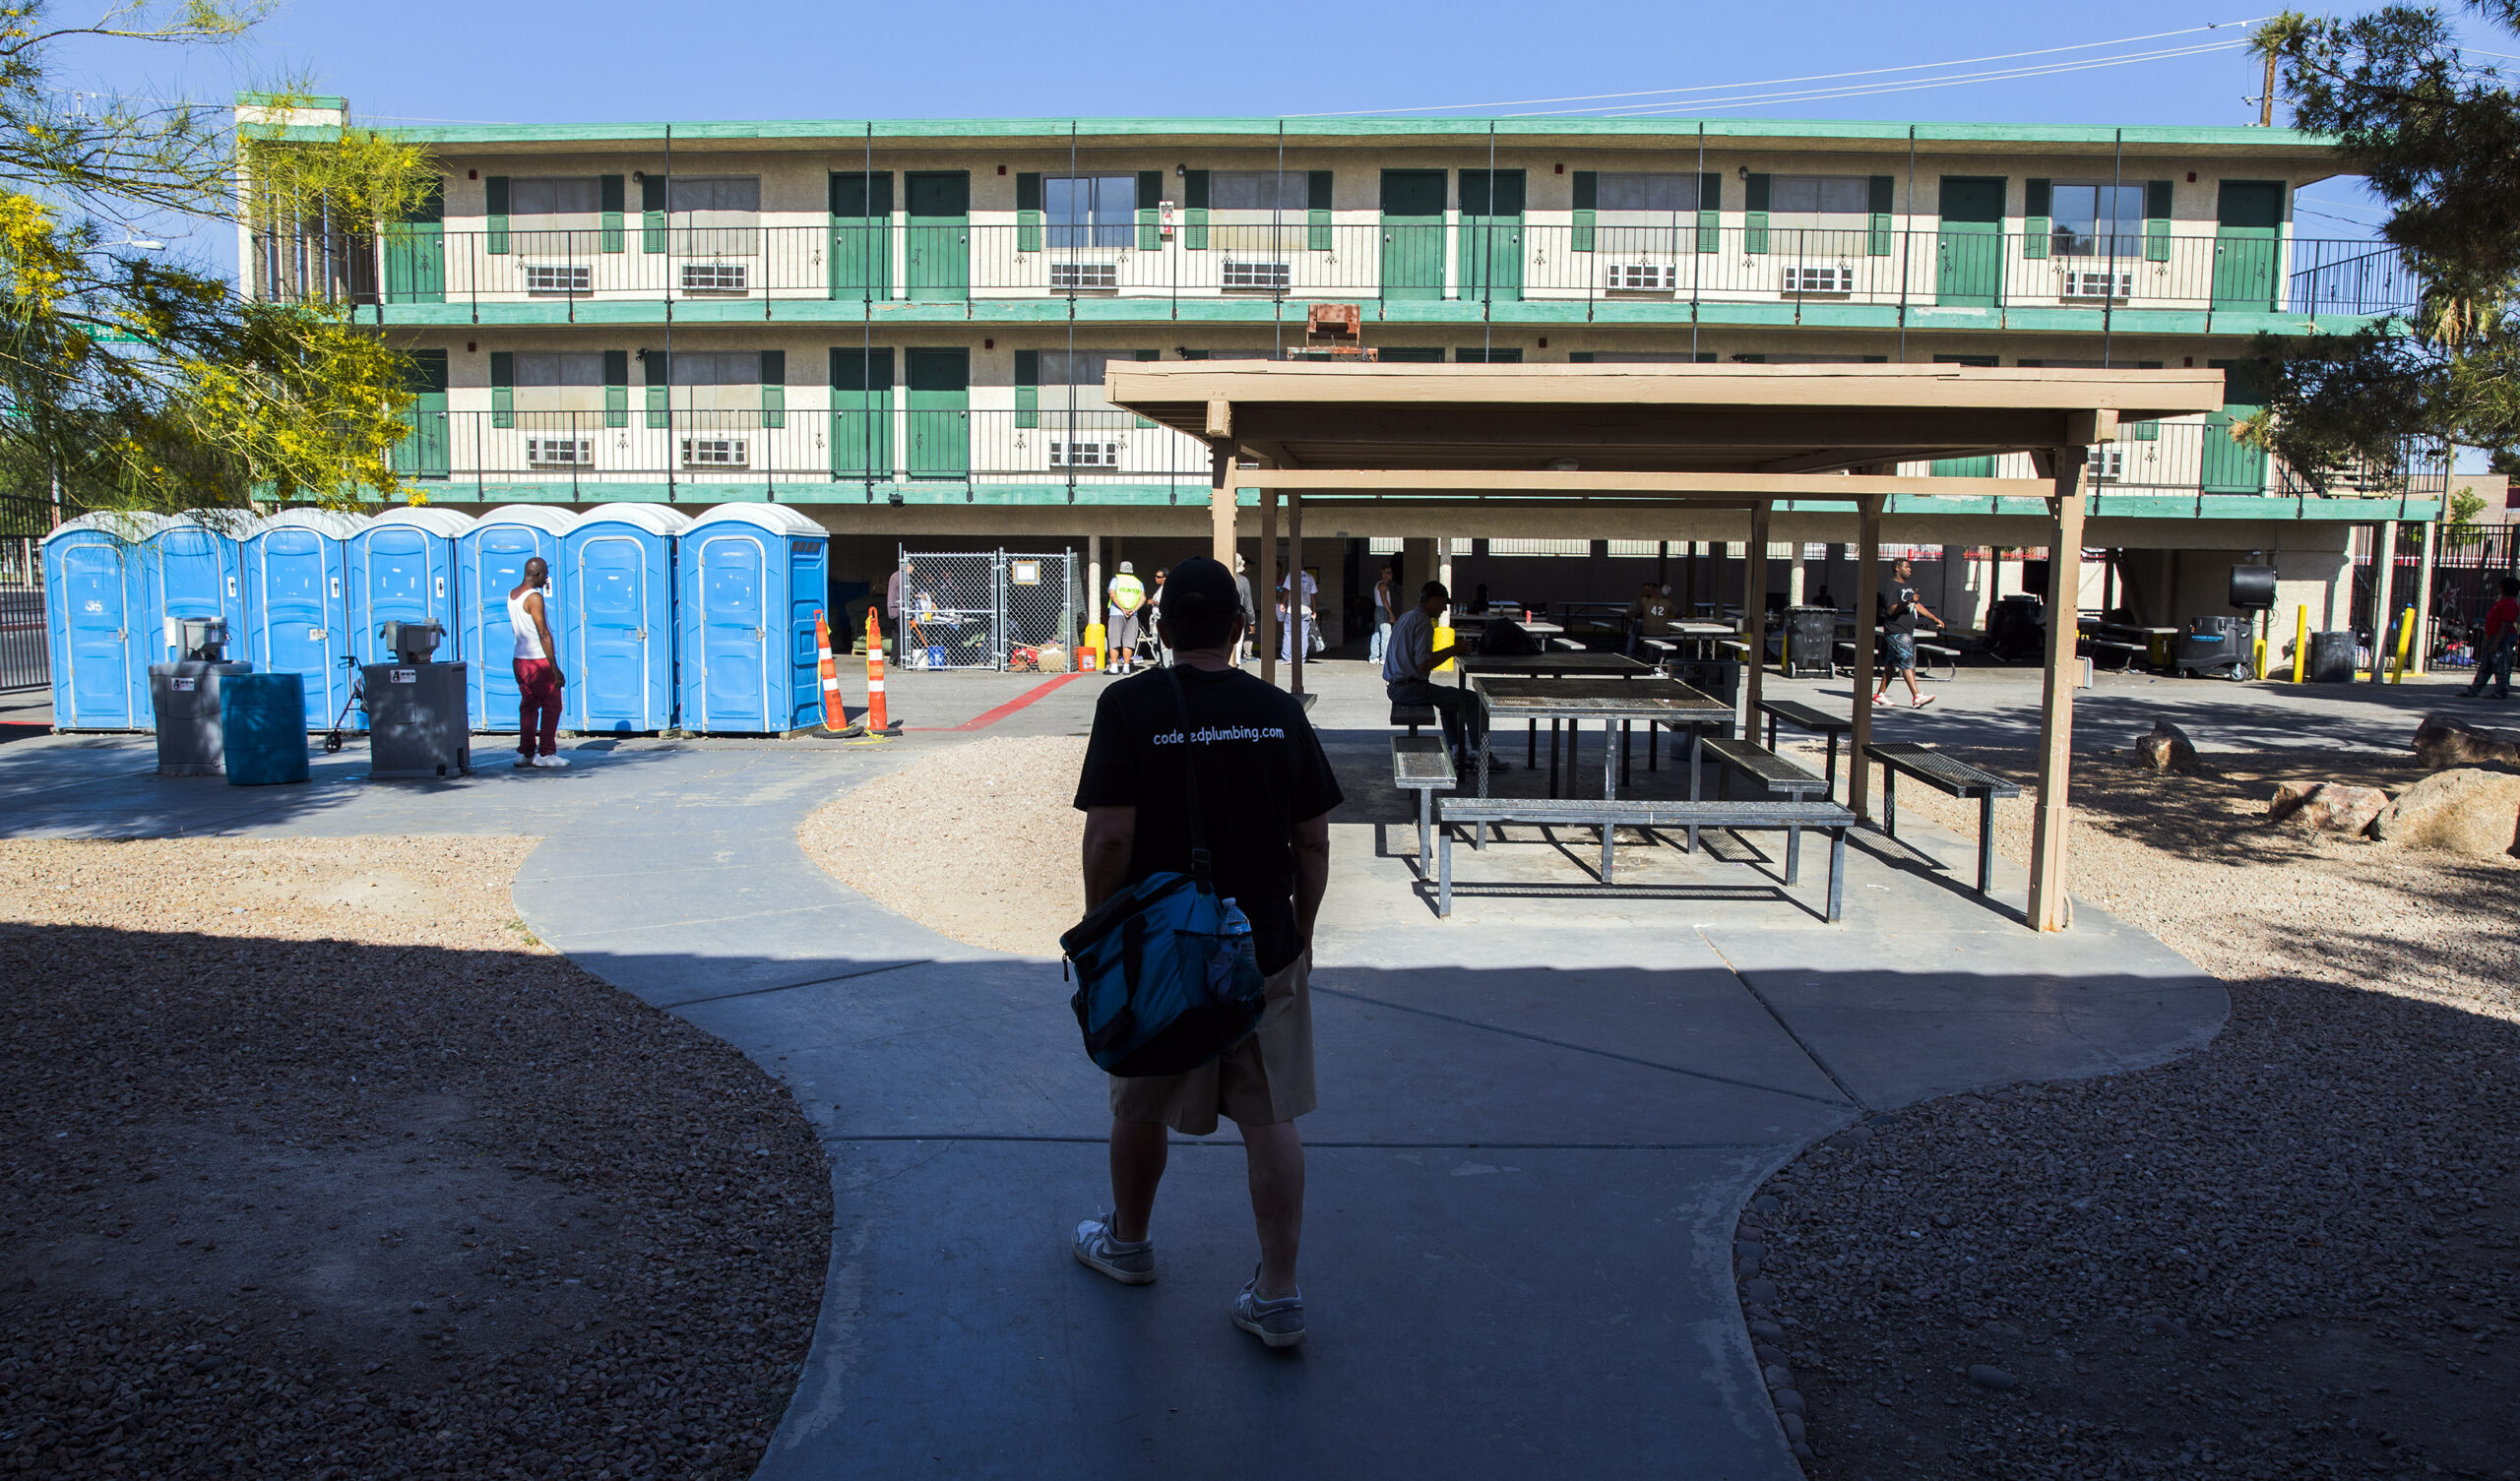 The city of Las Vegas operated The Courtyard provides day shelter in the homeless corridor on Foremaster Street